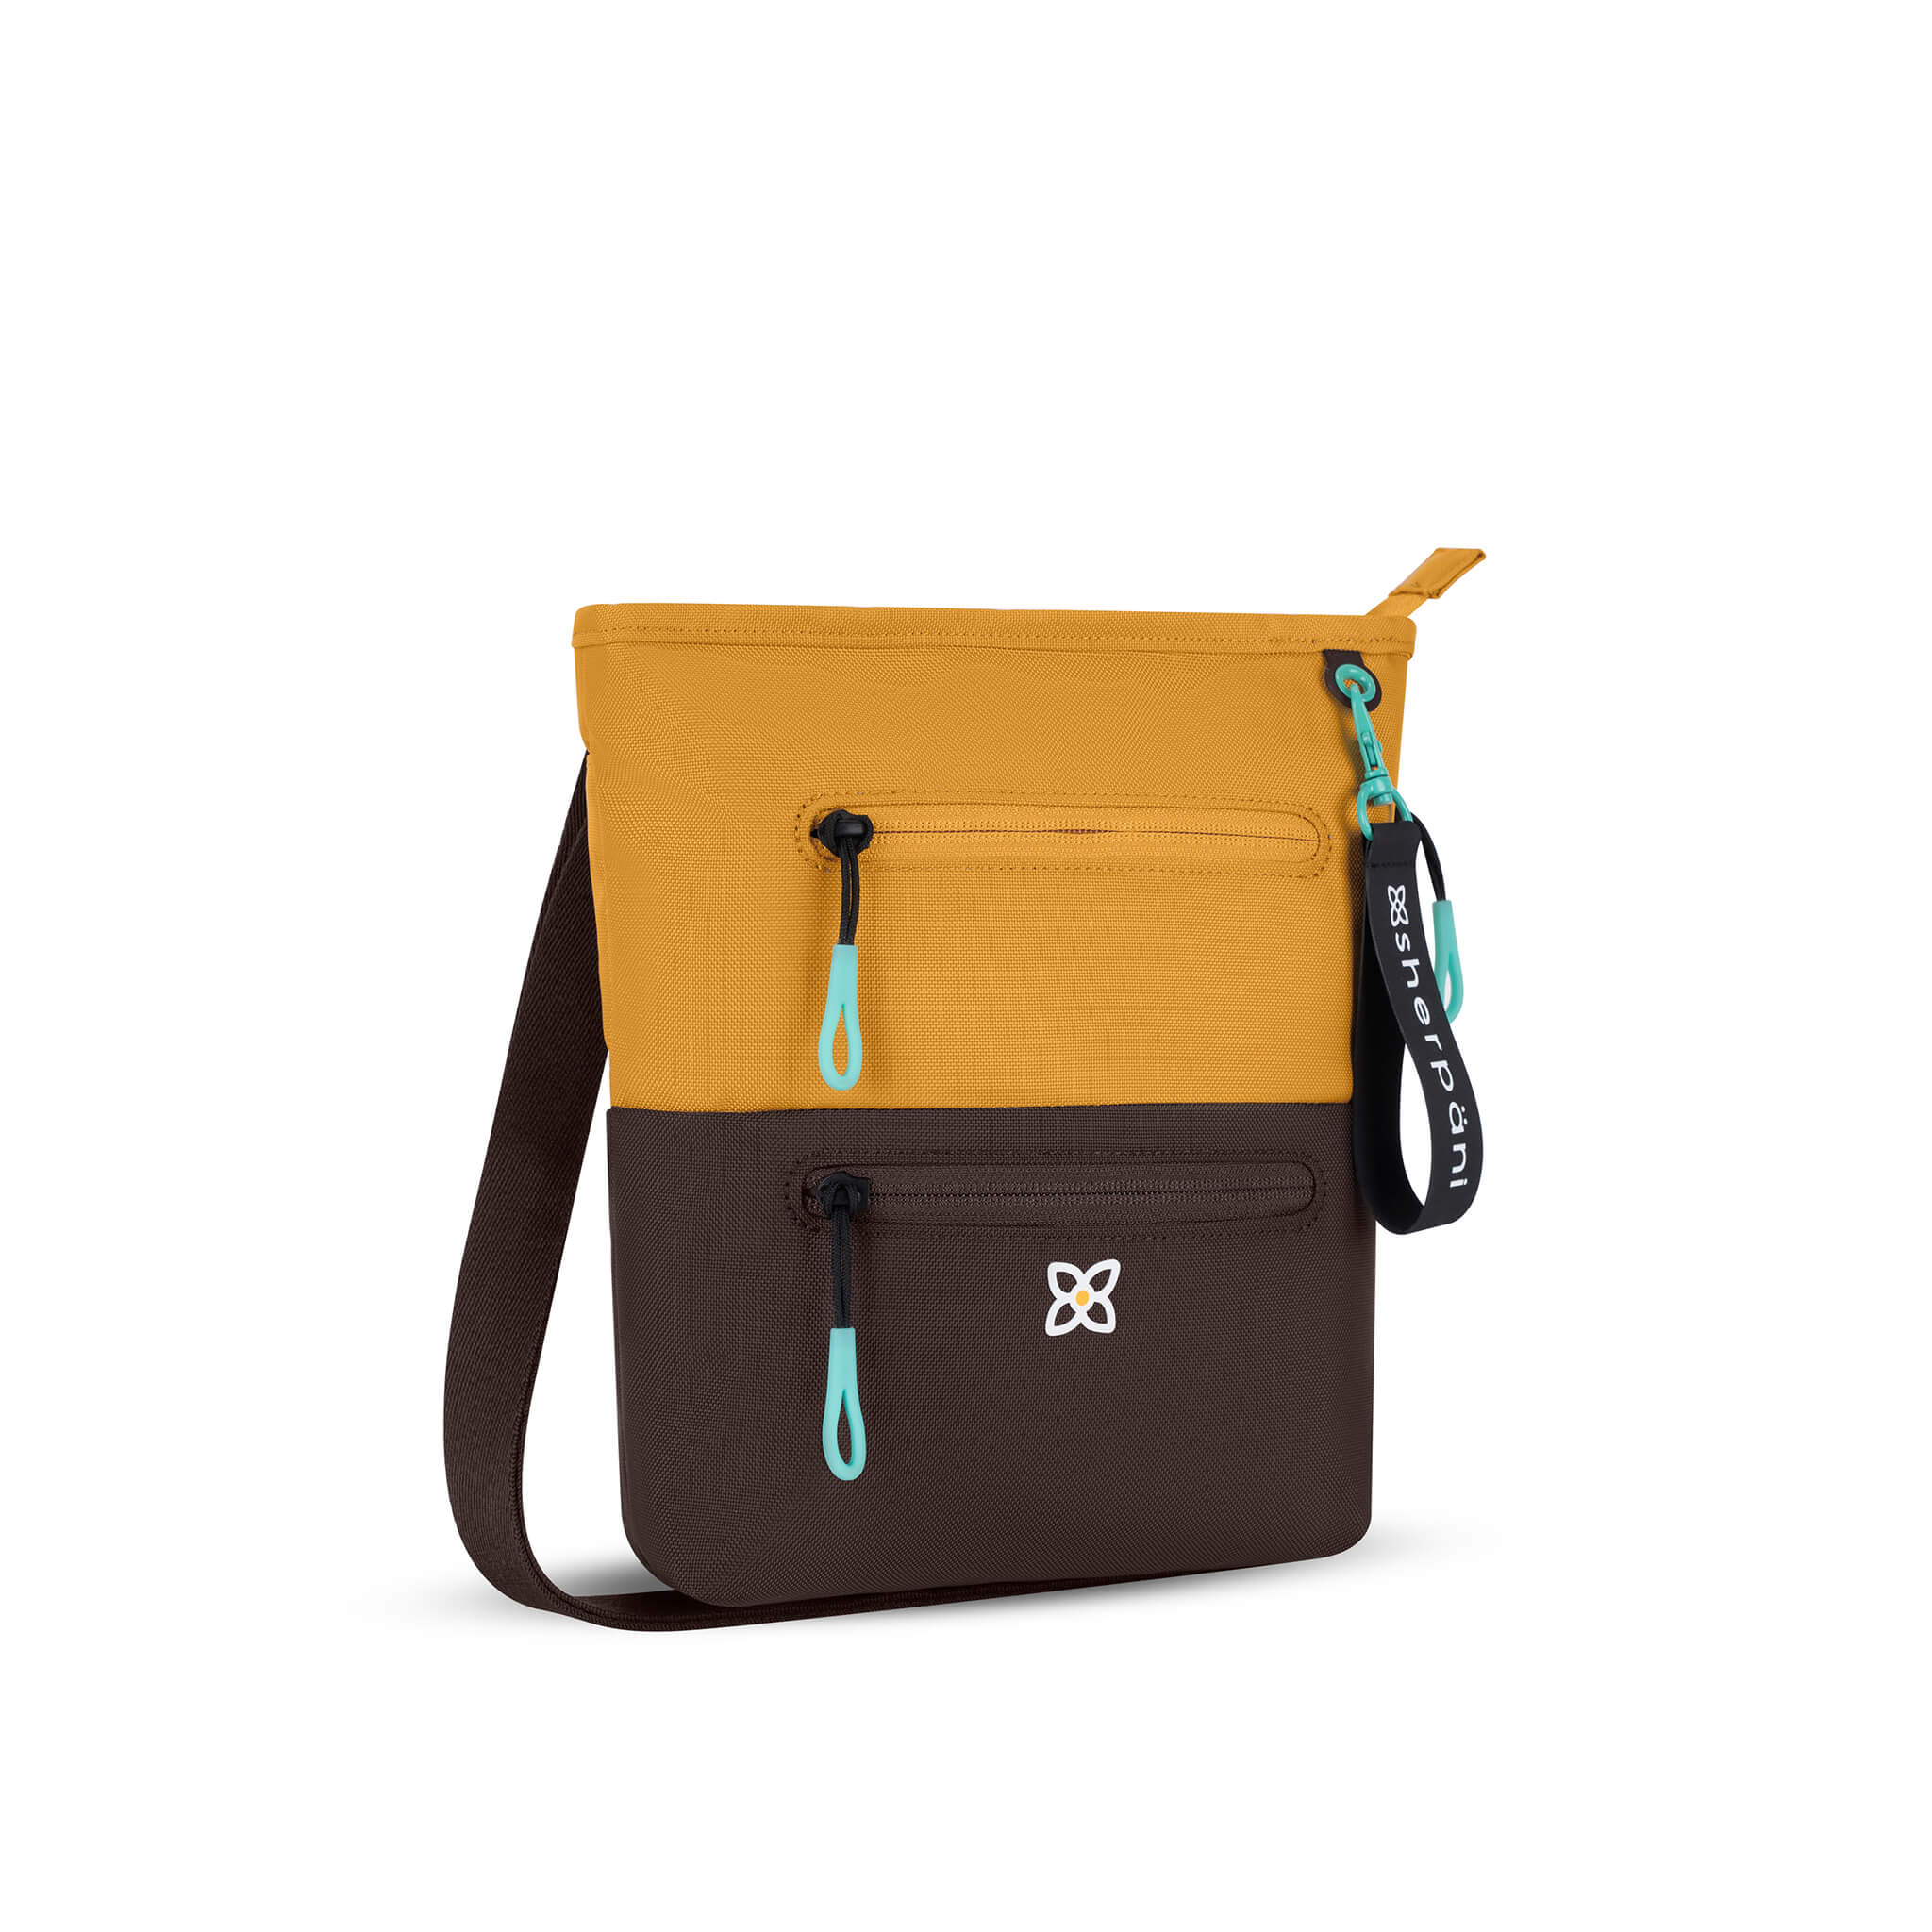 Angled front view of Sherpani crossbody travel bag, the Sadie in Sundial. Sadie features include two front zipper pockets, a discrete side pocket, detachable keychain, adjustable crossbody strap, back slip pocket and RFID blocking technology. The Sundial color is two-toned in yellow and dark brown with turquoise accents. #color_sundial